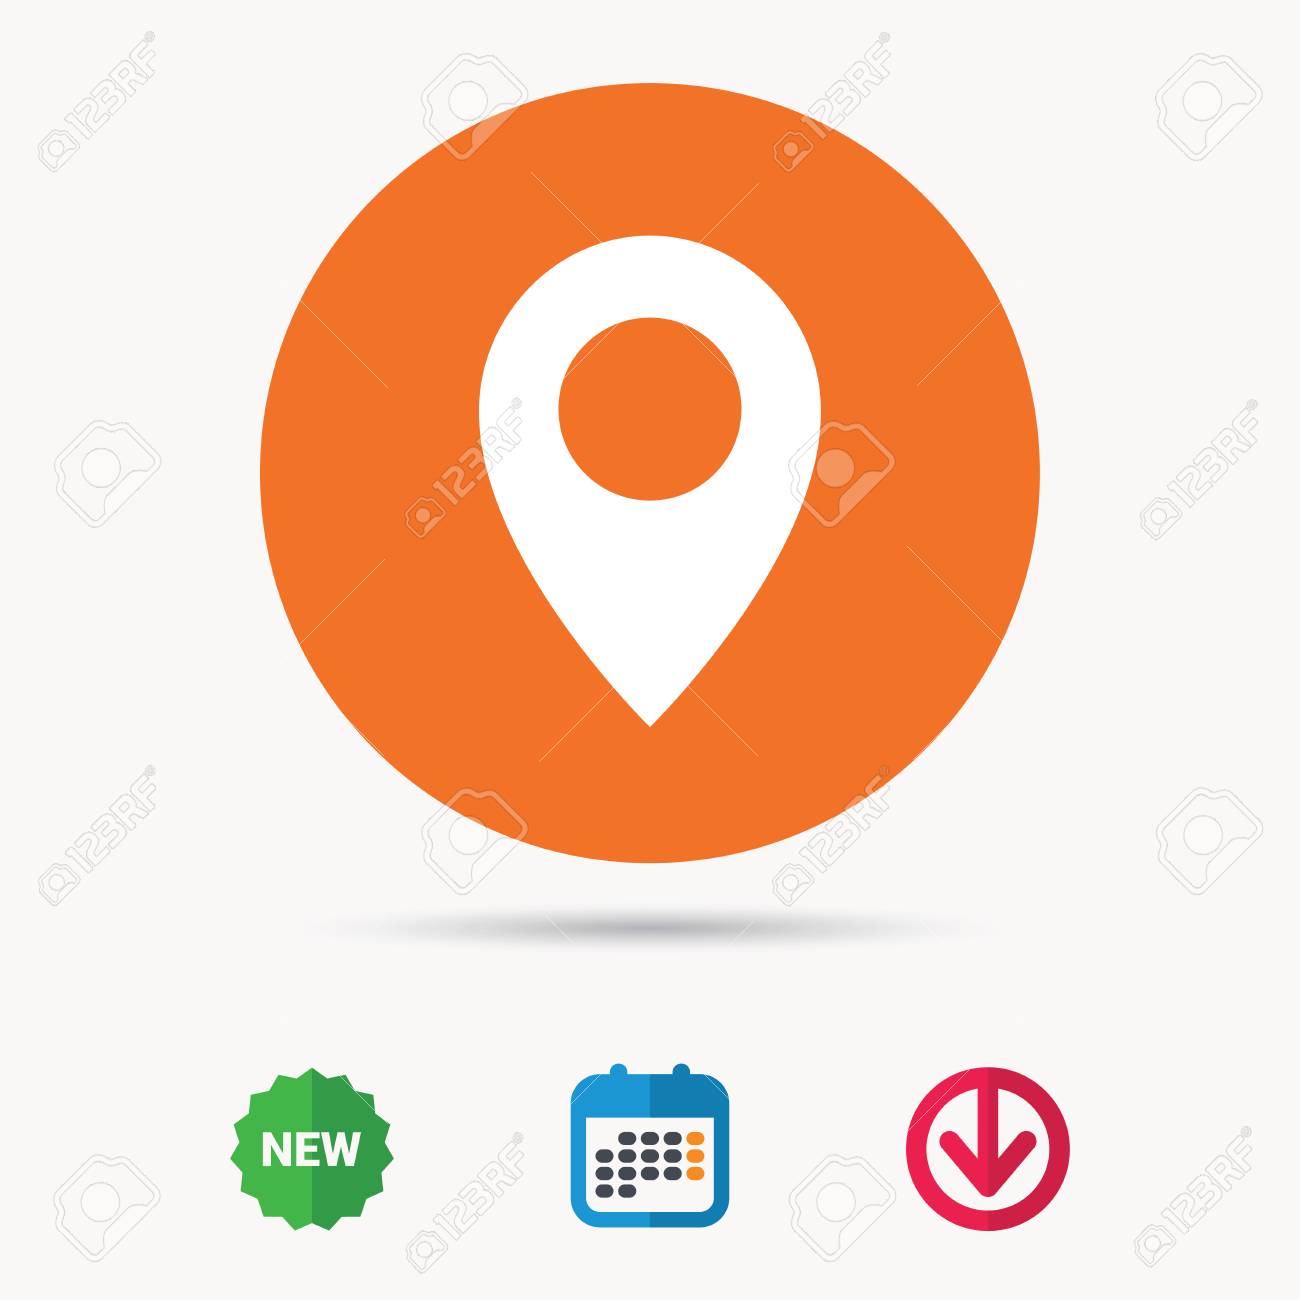 Address, location, map, new, pin, place, pointer icon | Icon 